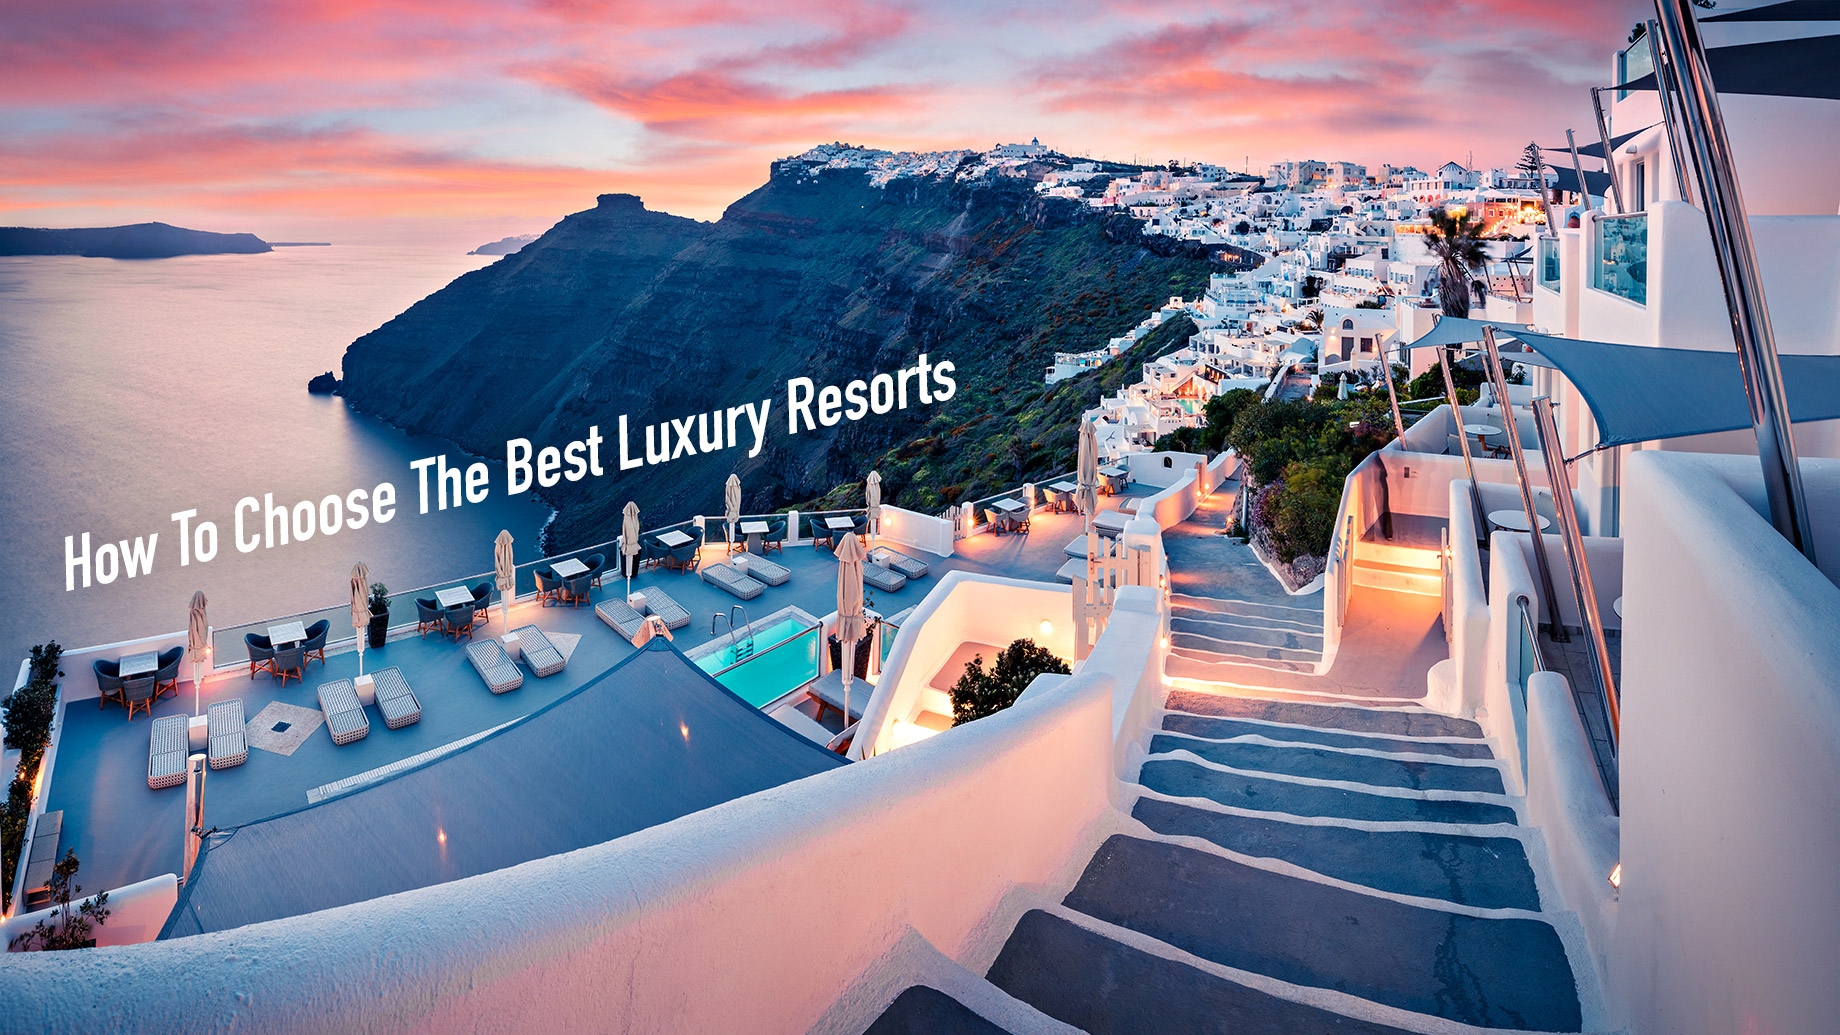 How To Choose The Best Luxury Resorts